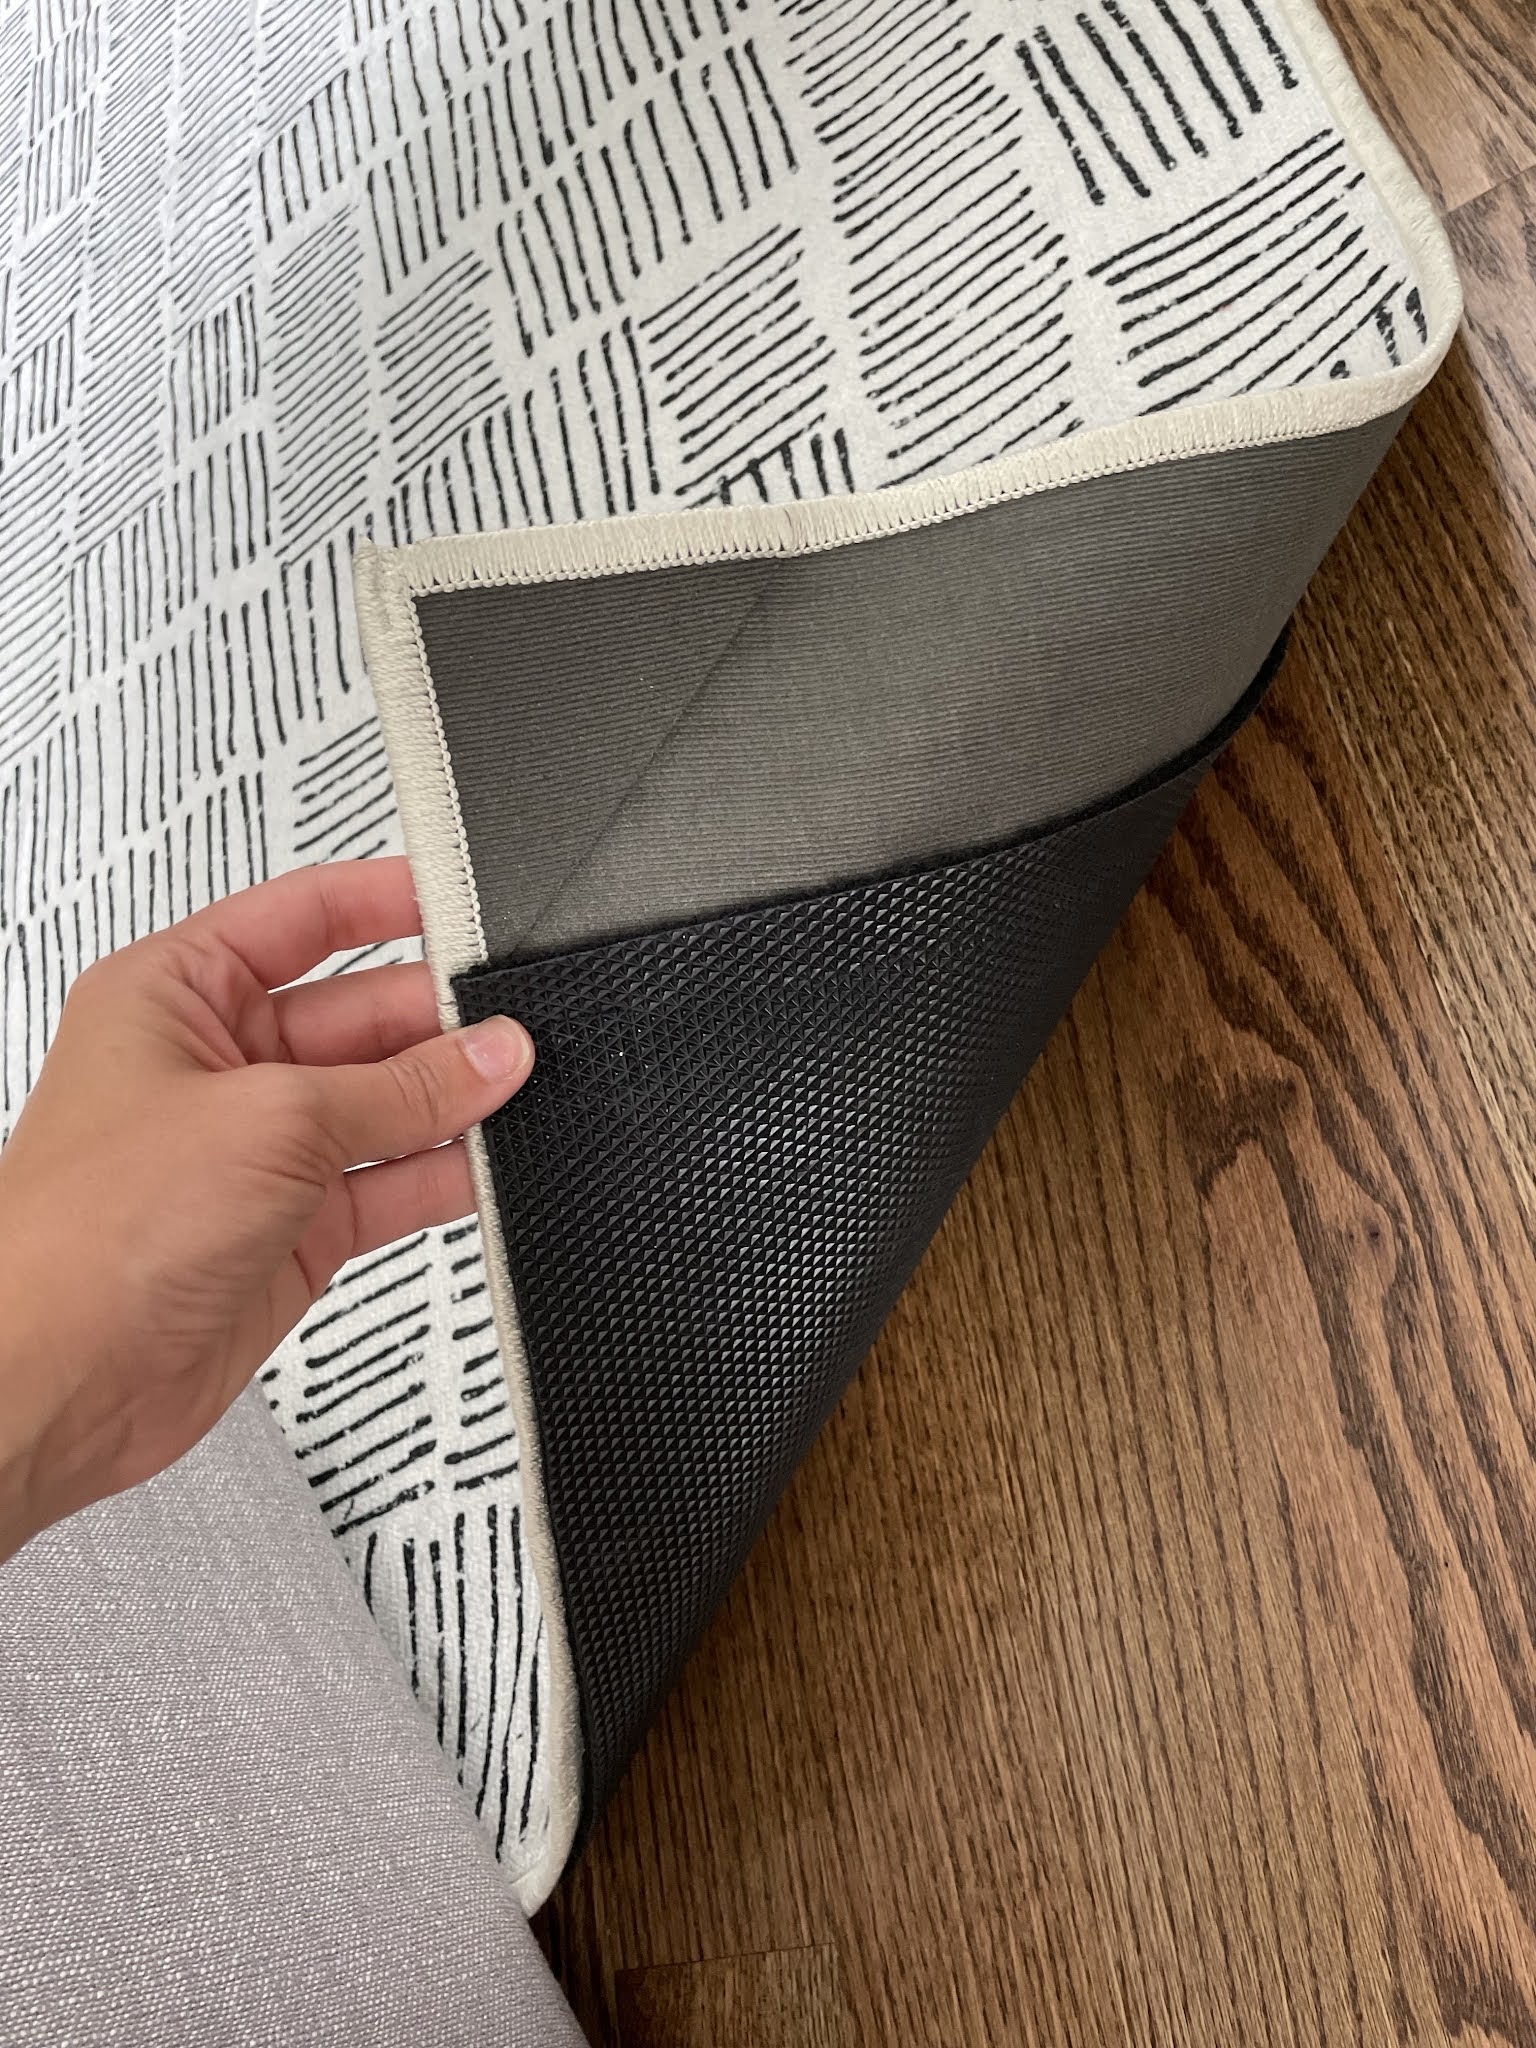 Ruggable Review — The Washable Rug Tested